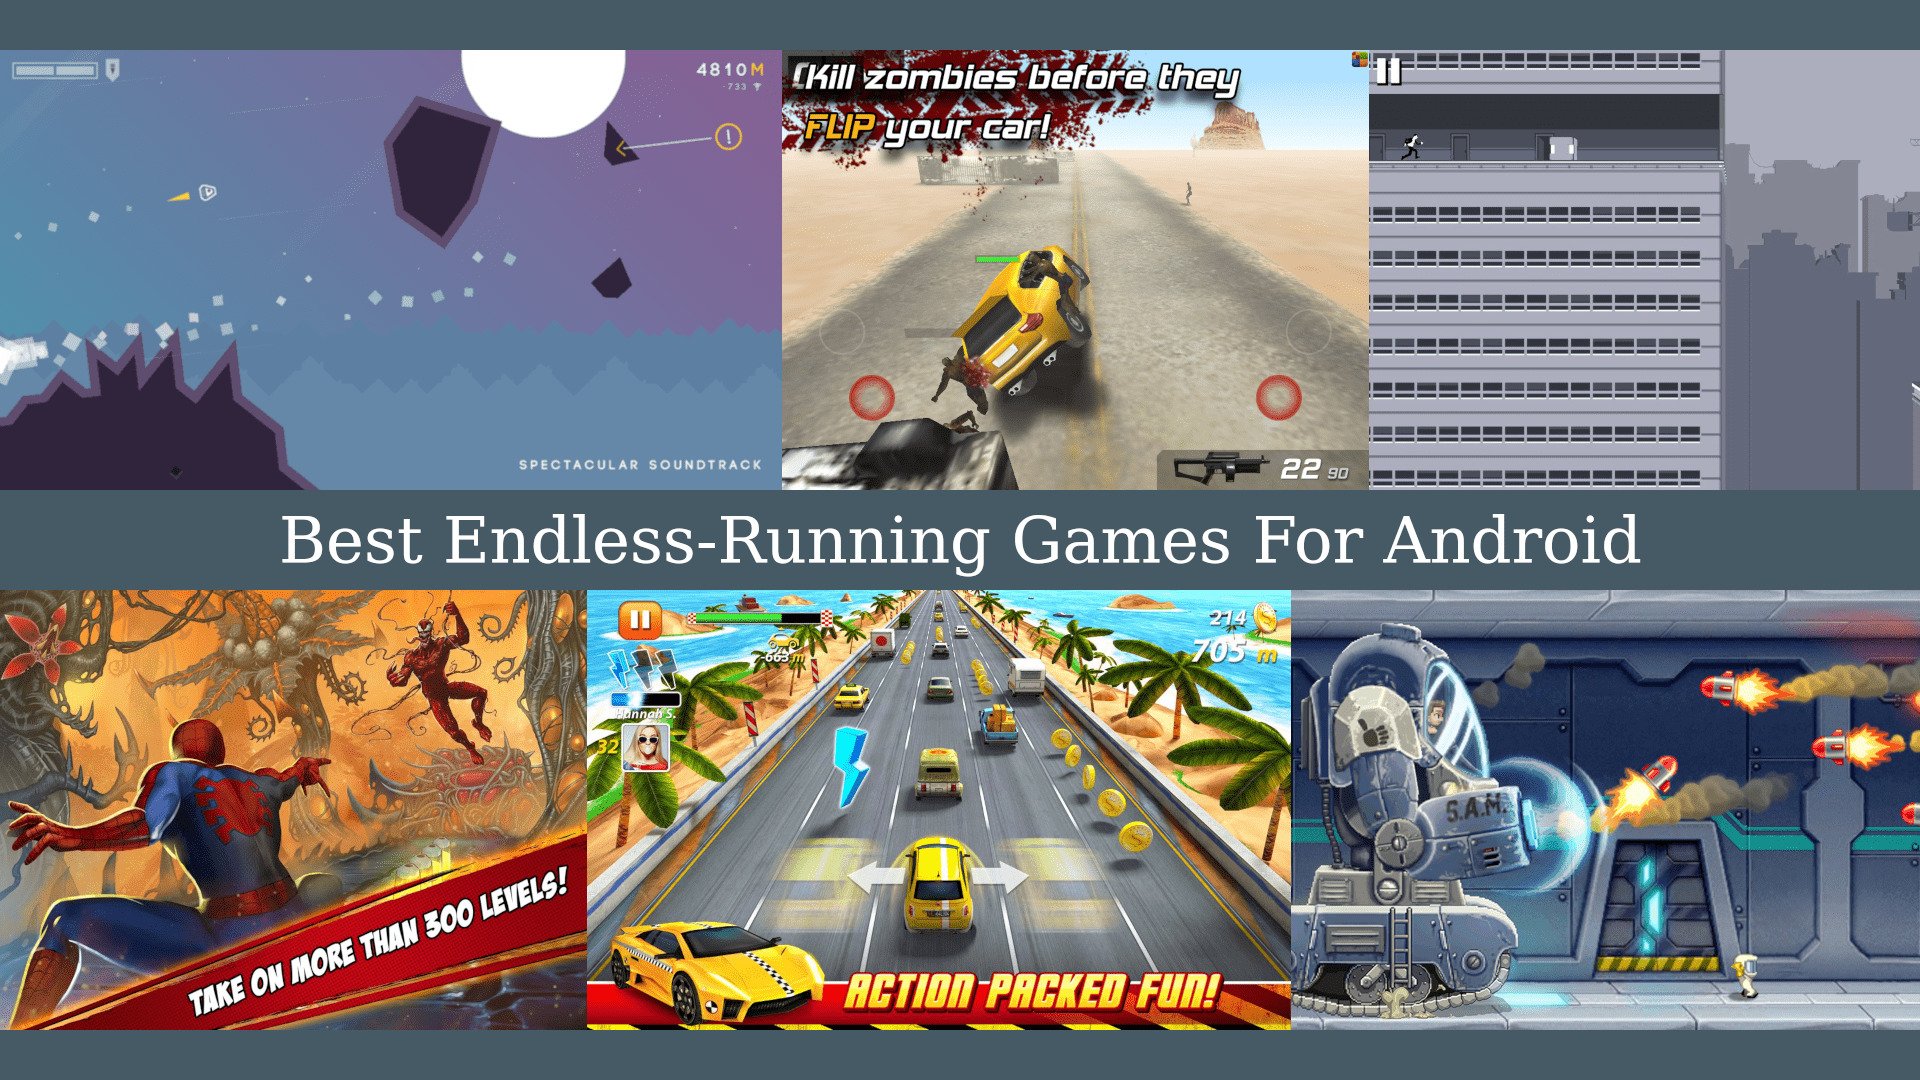 Best Endless-Running Games For Android